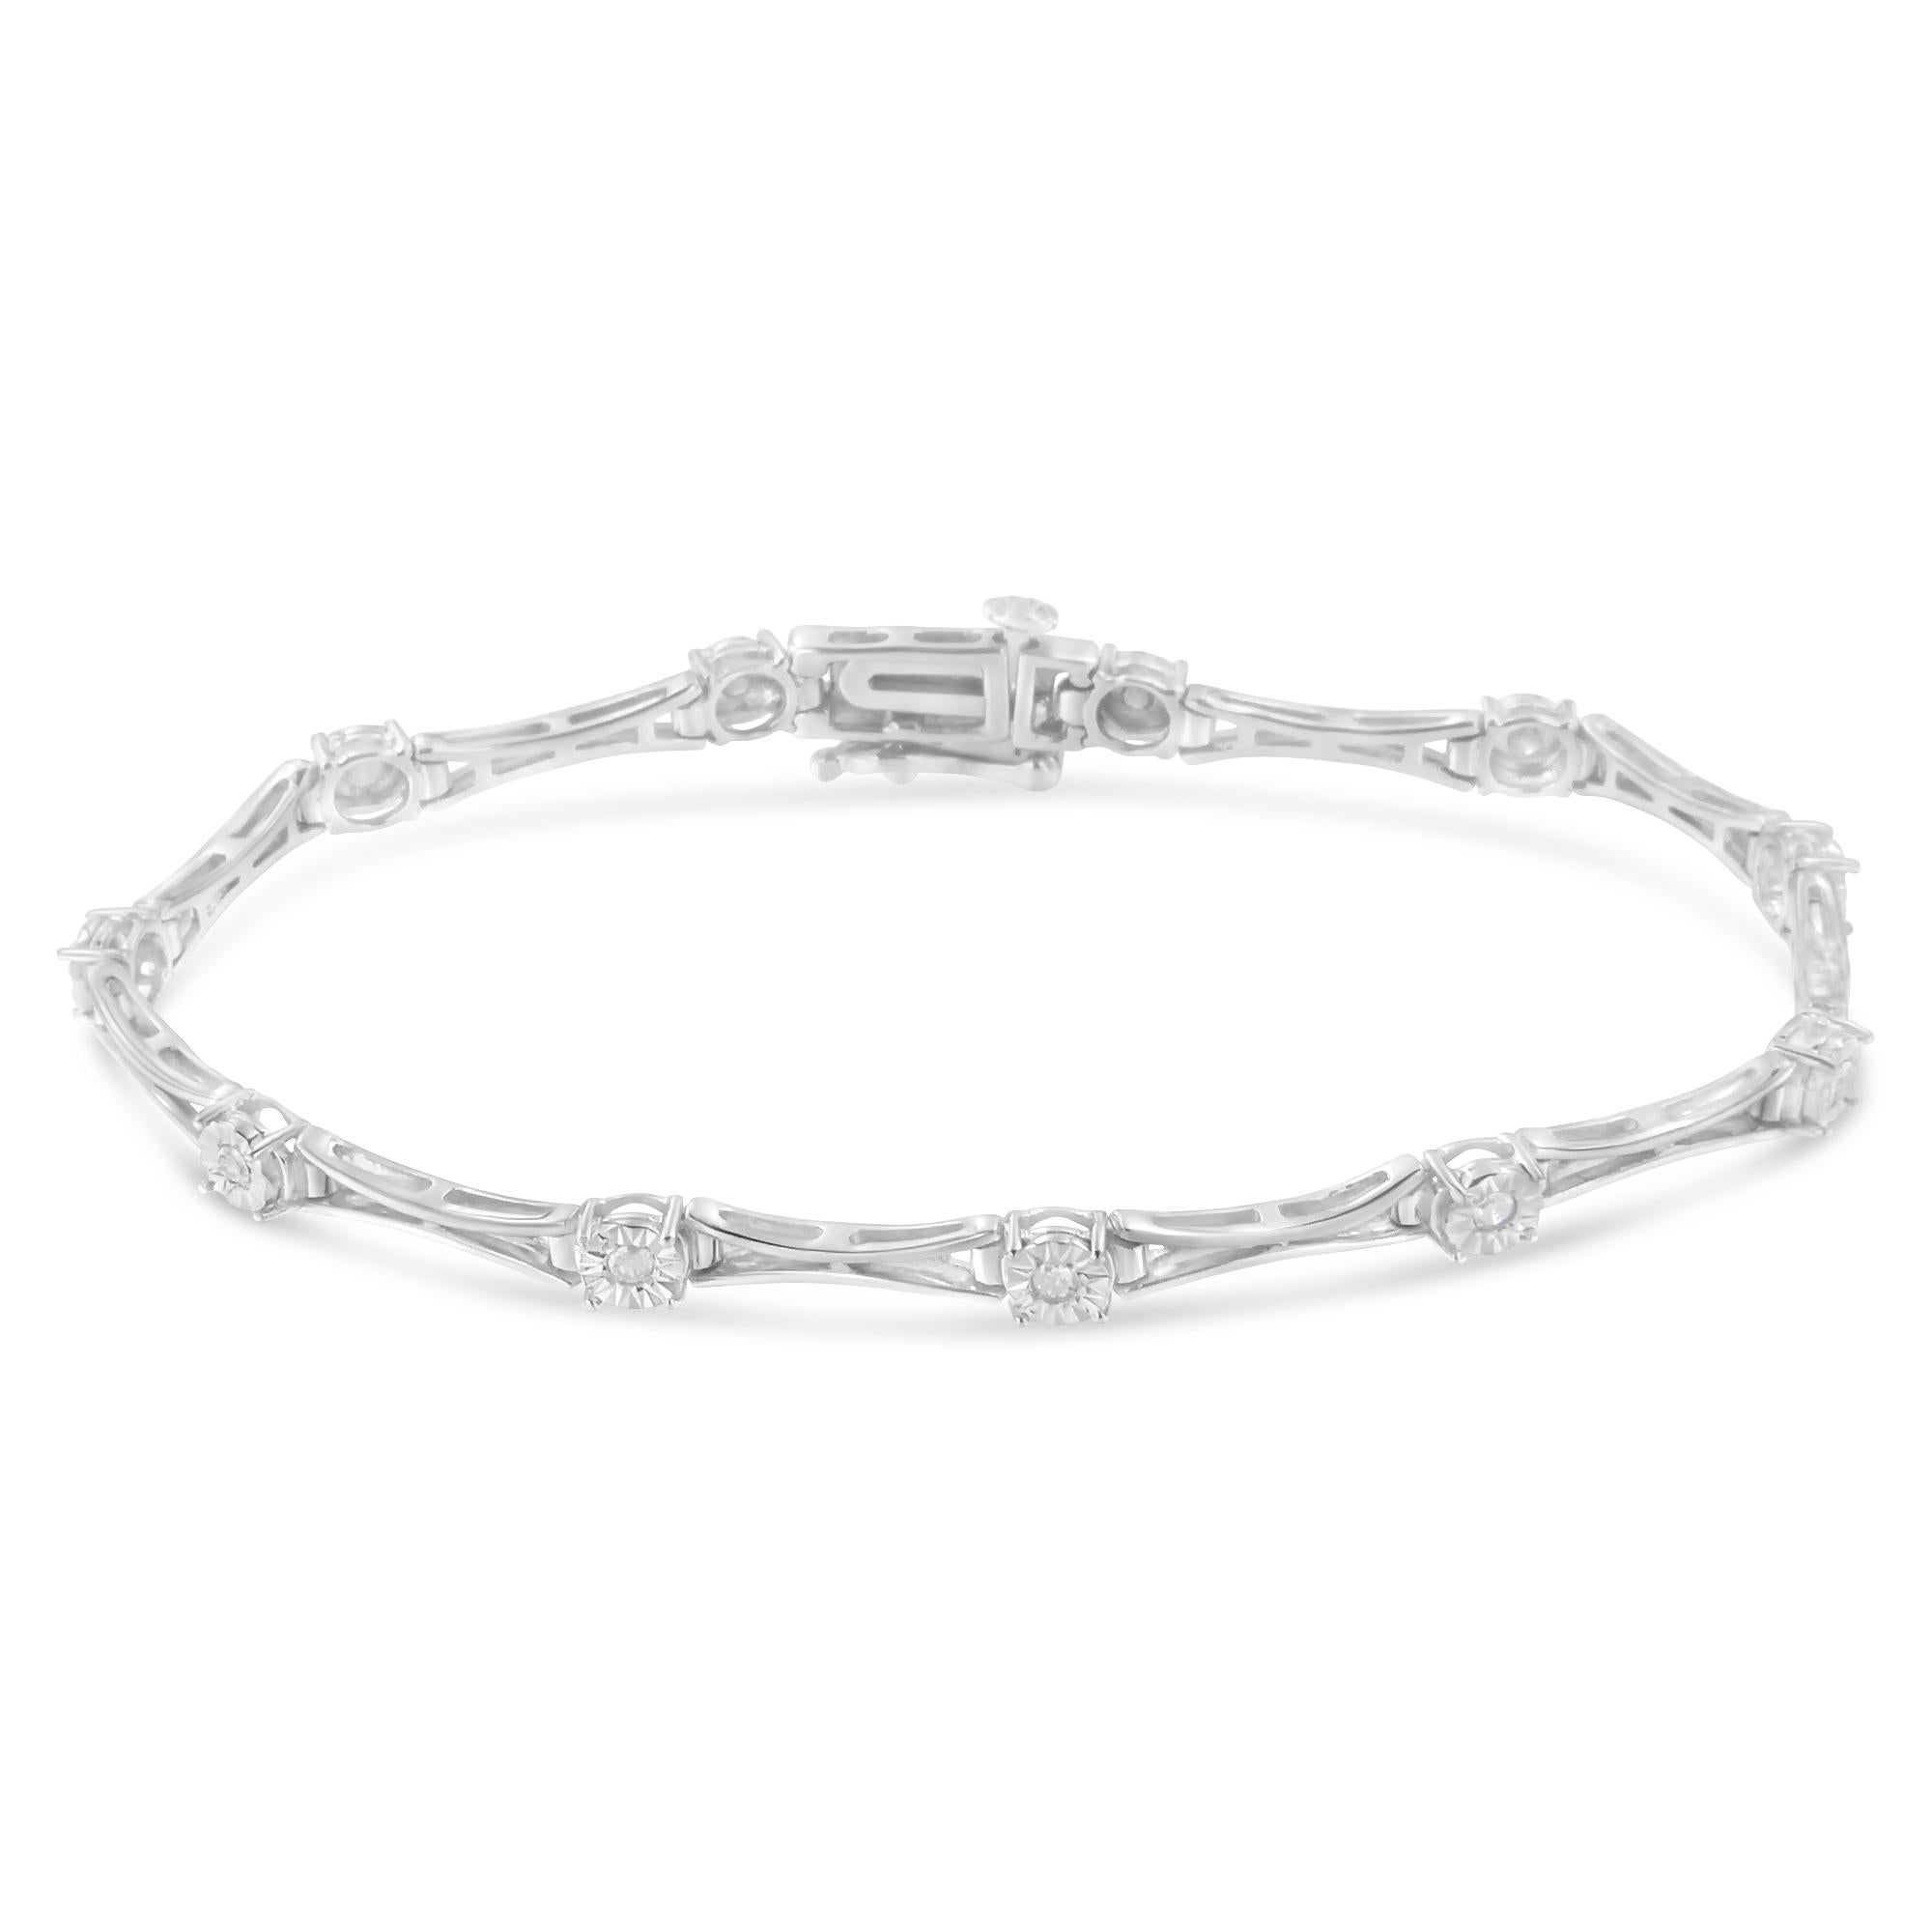 Elegant and timeless, this gorgeous .925 sterling silver tennis bracelet features 0.25 carat total weight of round, promo-quality, rose-cut diamonds. These diamonds are set in a unique miracle-plate setting which centers each genuine diamond in a